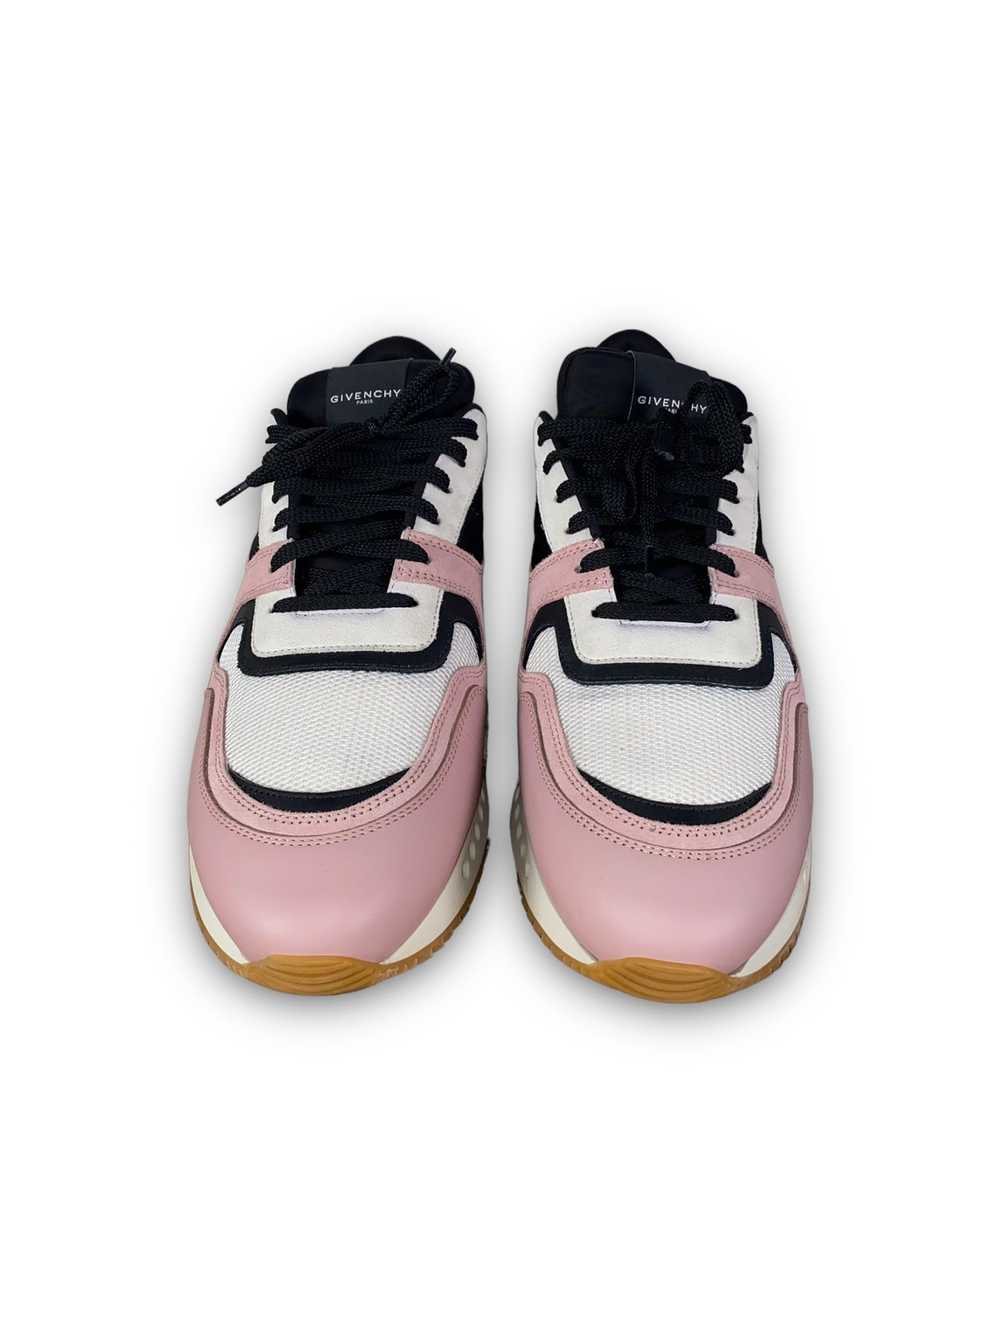 Givenchy Runner Active Trainers, size 42, Pink - image 7